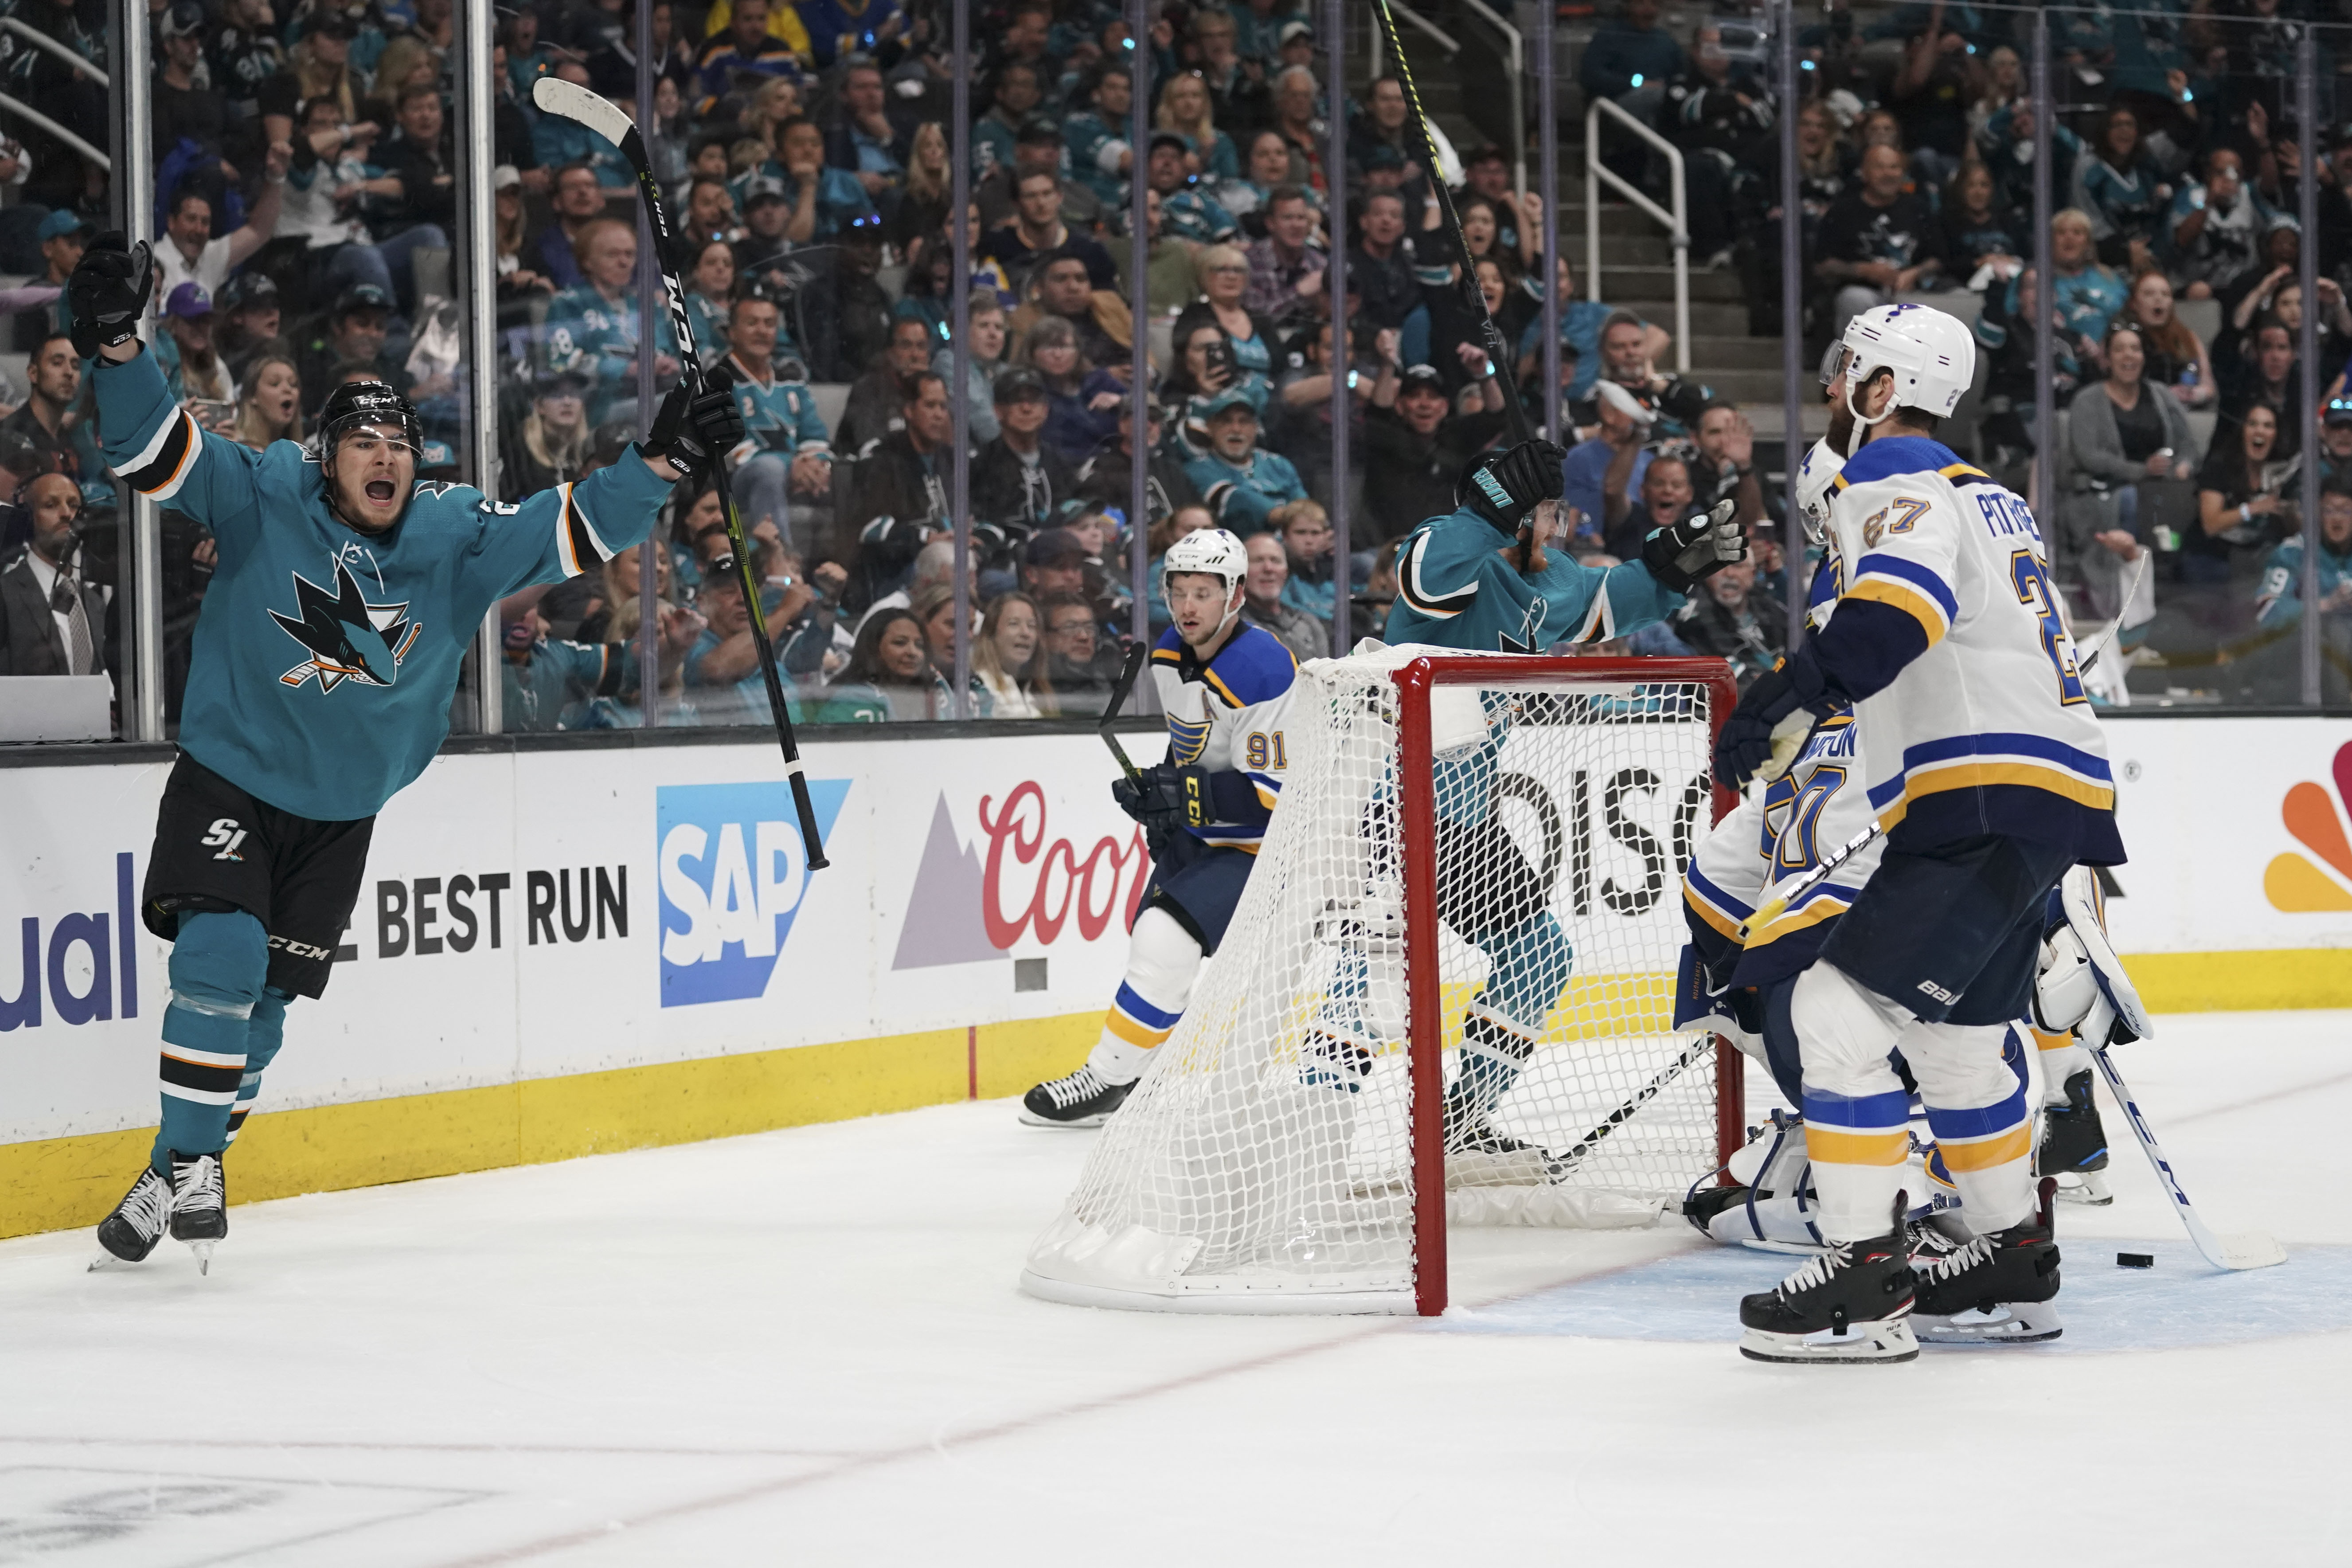 2019-05-12T020359Z_890454061_NOCID_RTRMADP_3_NHL-STANLEY-CUP-PLAYOFFS-ST-LOUIS-BLUES-AT-SAN-JOSE-SHARKS